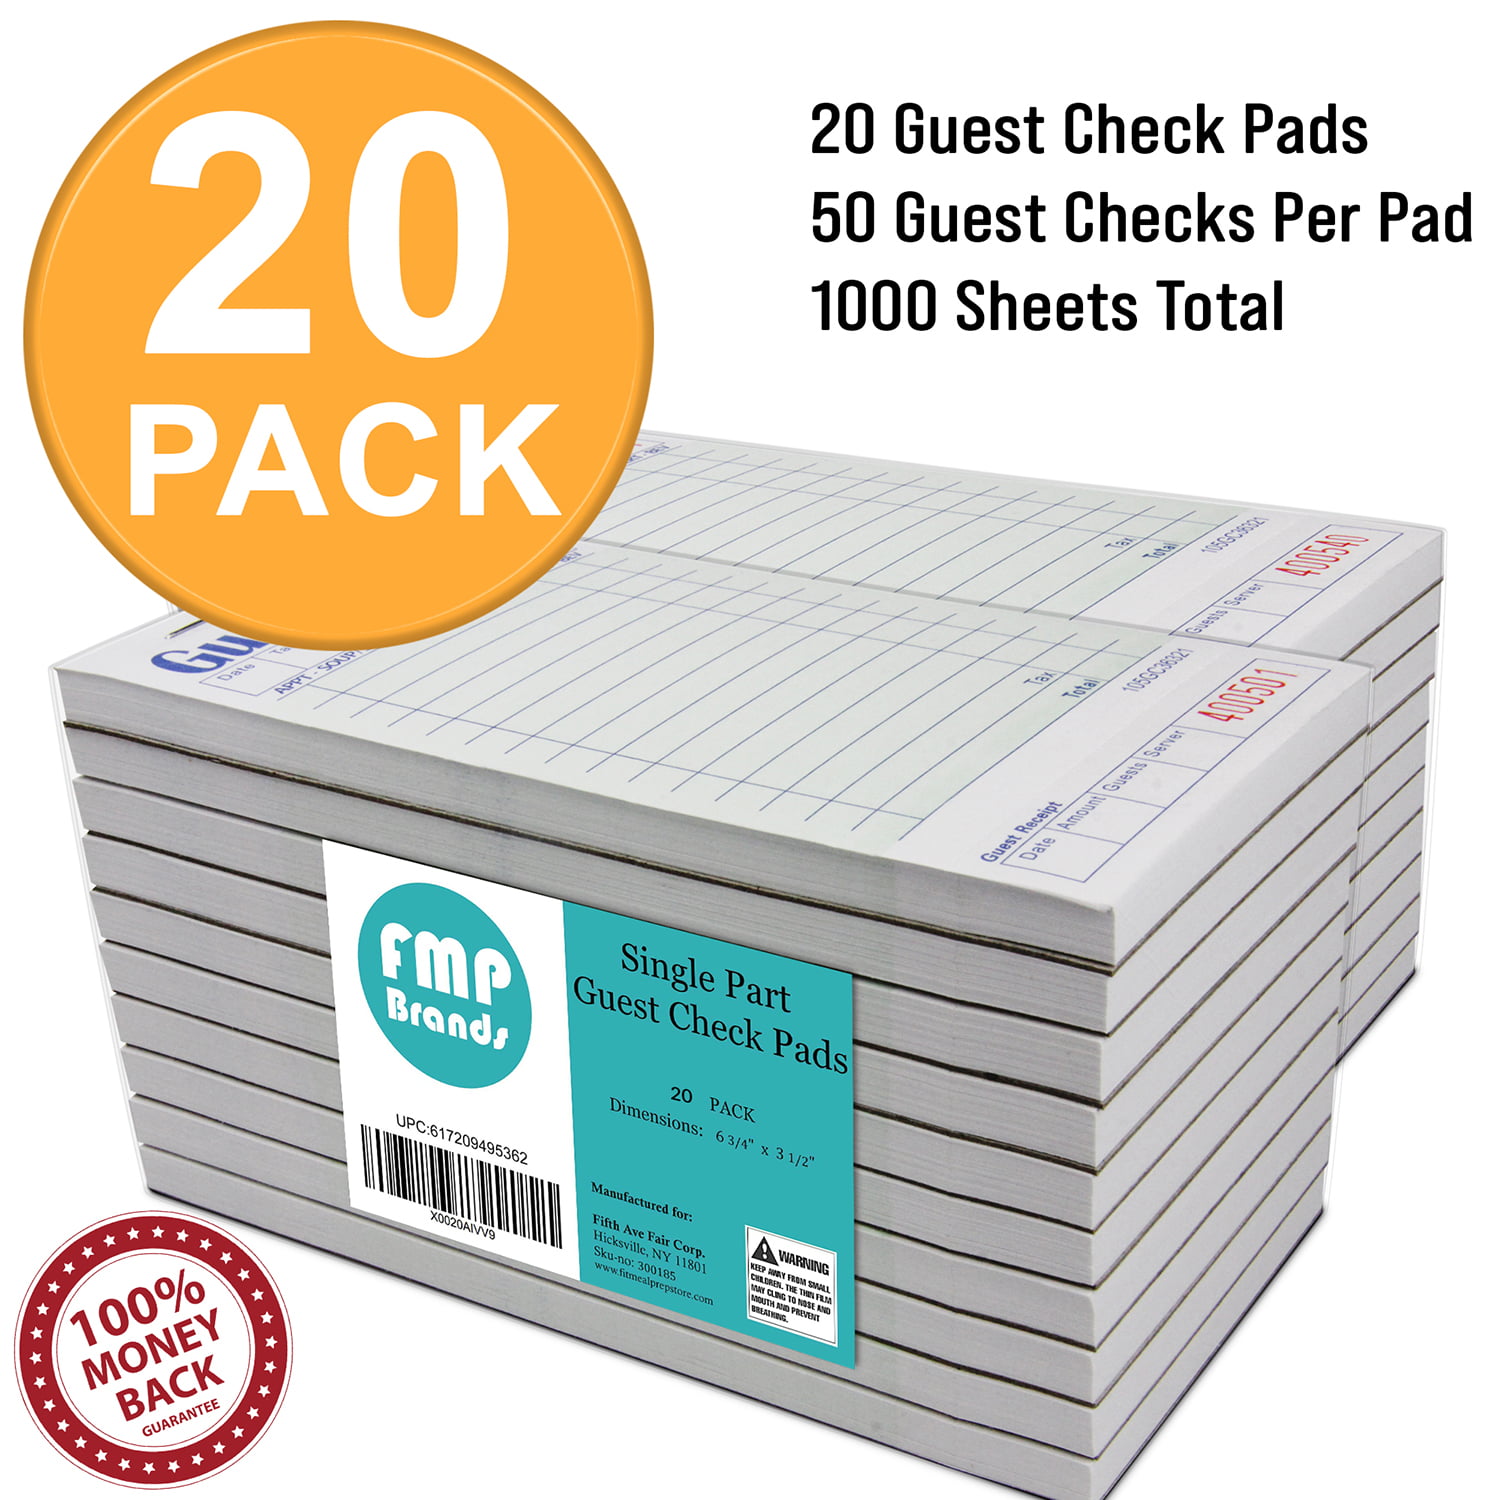 Adams Guest Check Form Pads, Single Part, Perforated, 50 Sh/Pad